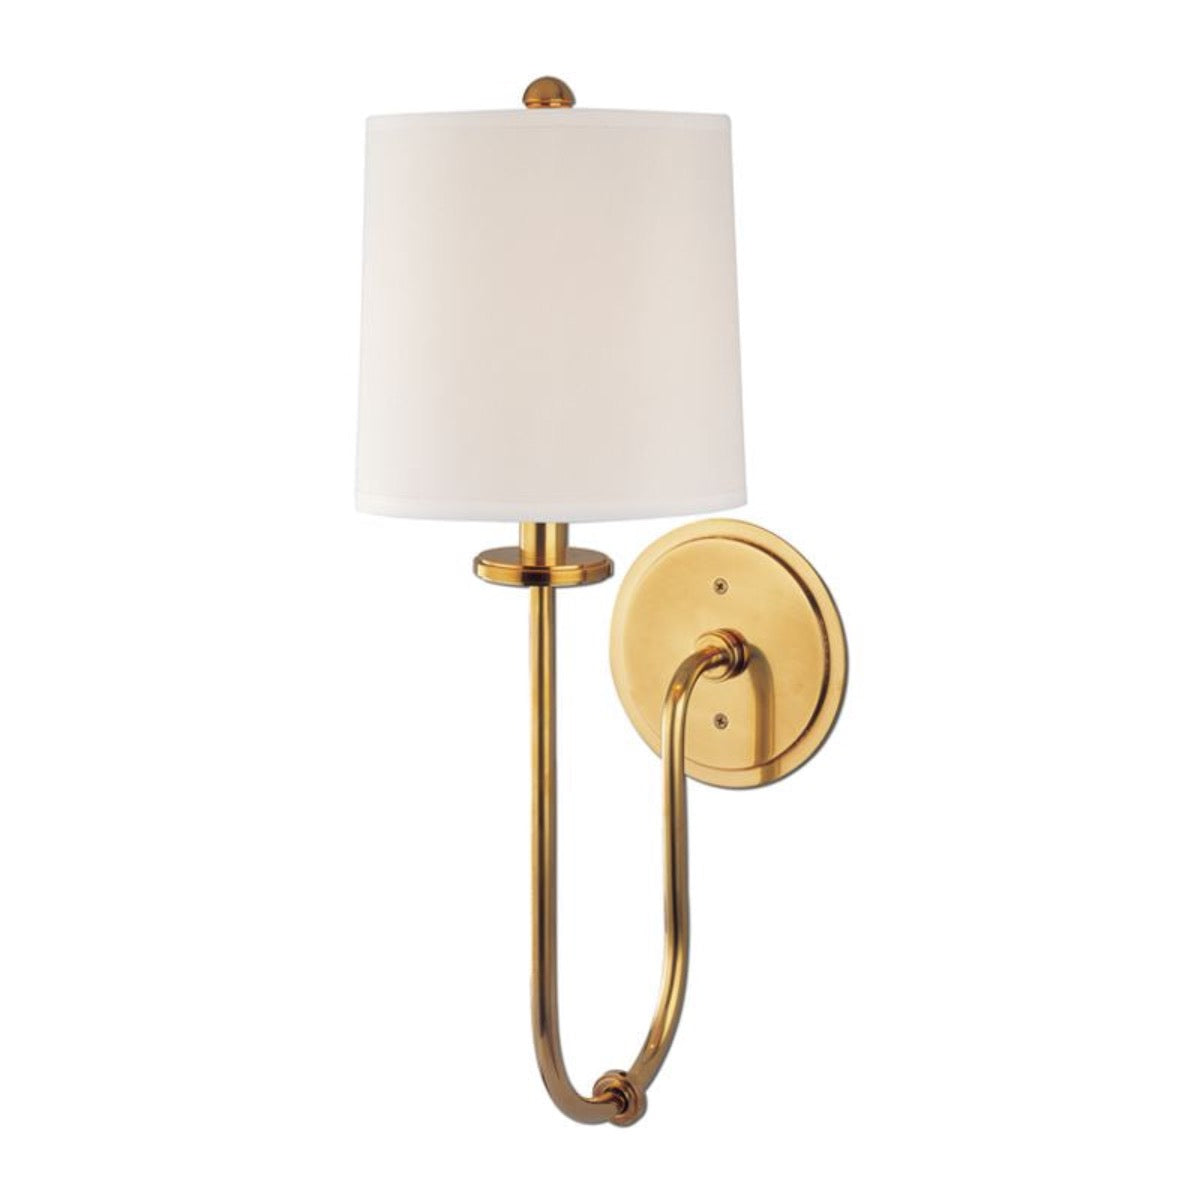 Brigitte Sconce Aged Brass. Left angle view.